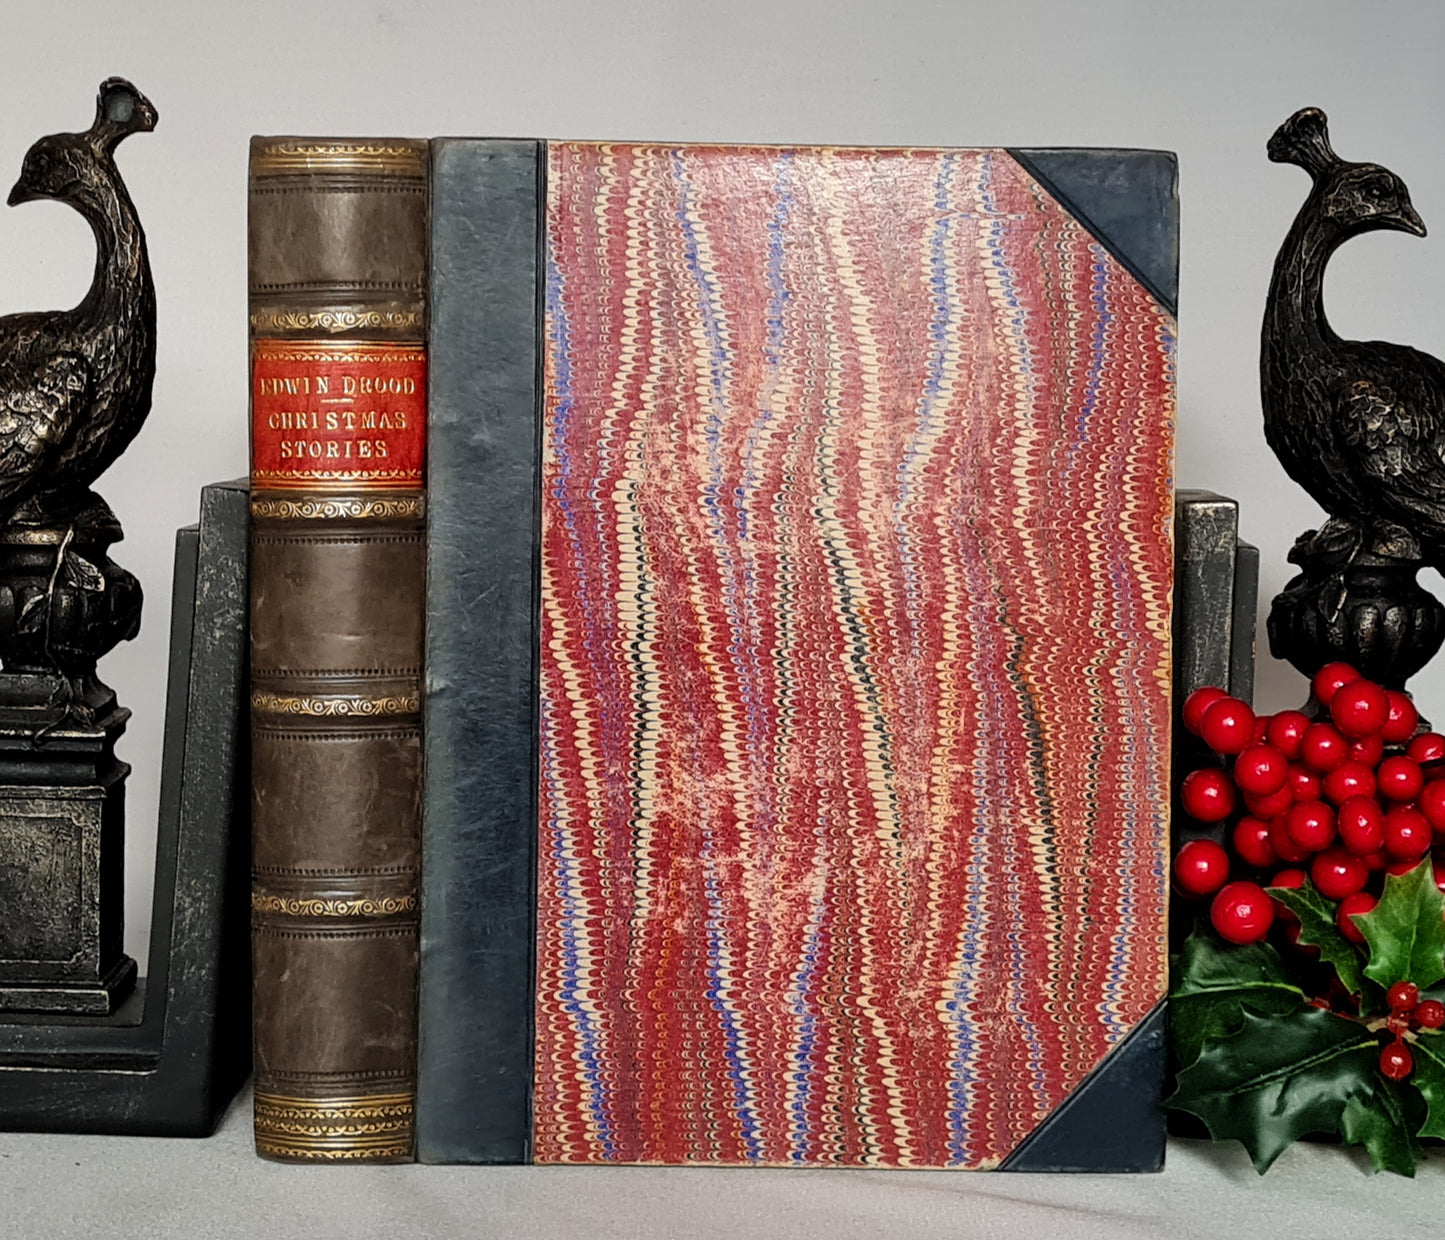 1880 Christmas Stories by Charles Dickens also Bound With The Mystery of Edwin Drood etc. / NOT A Christmas Carol / Illustrated Antique Book